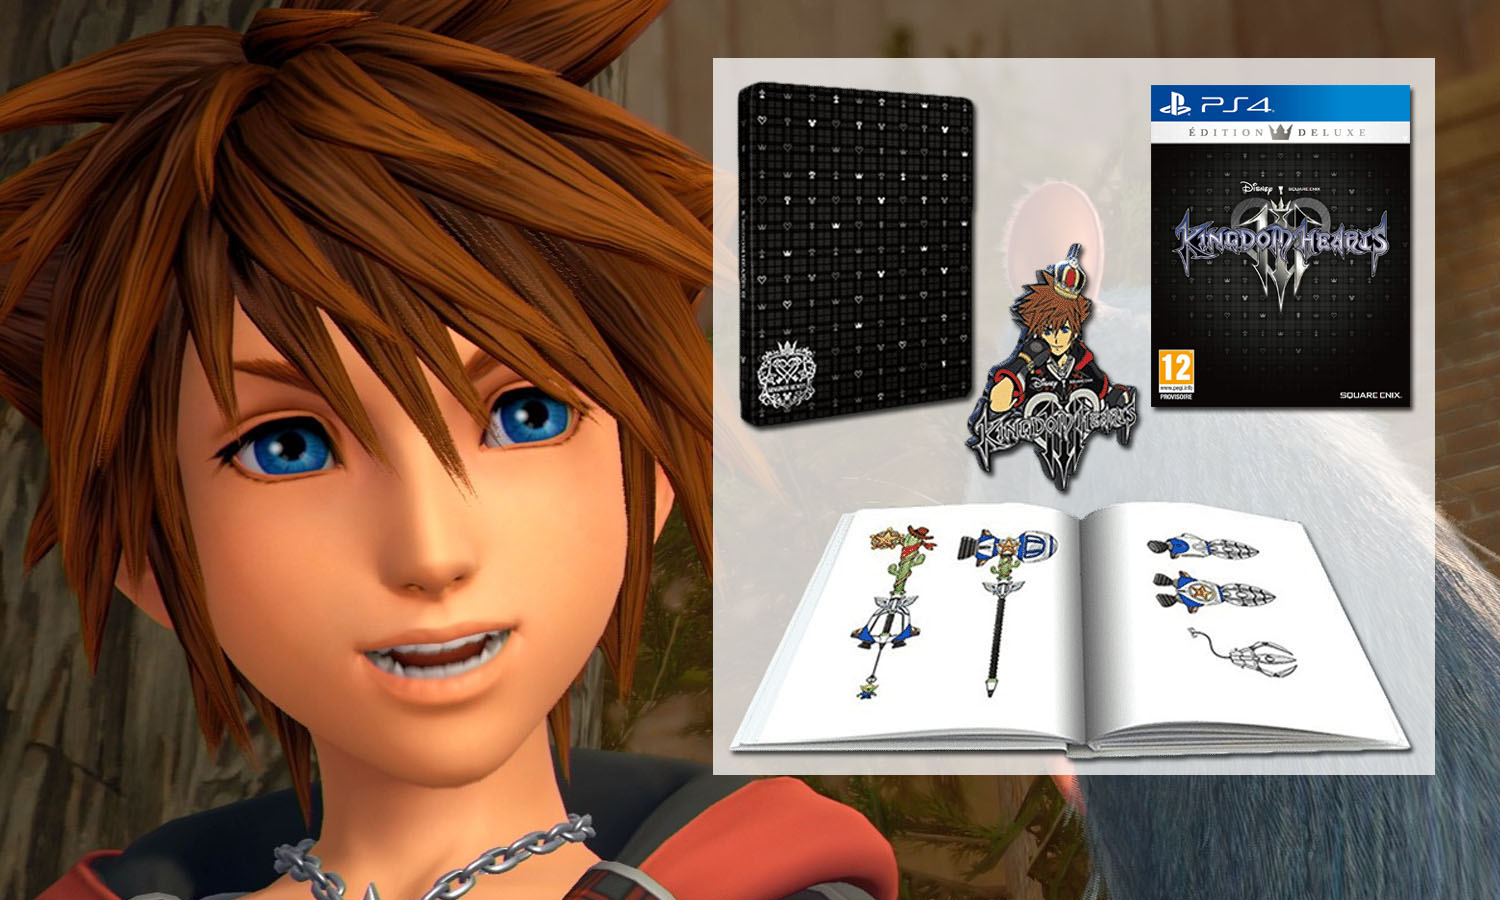 difference between kingdom hearts 3 and kingdomhearts 3 delux